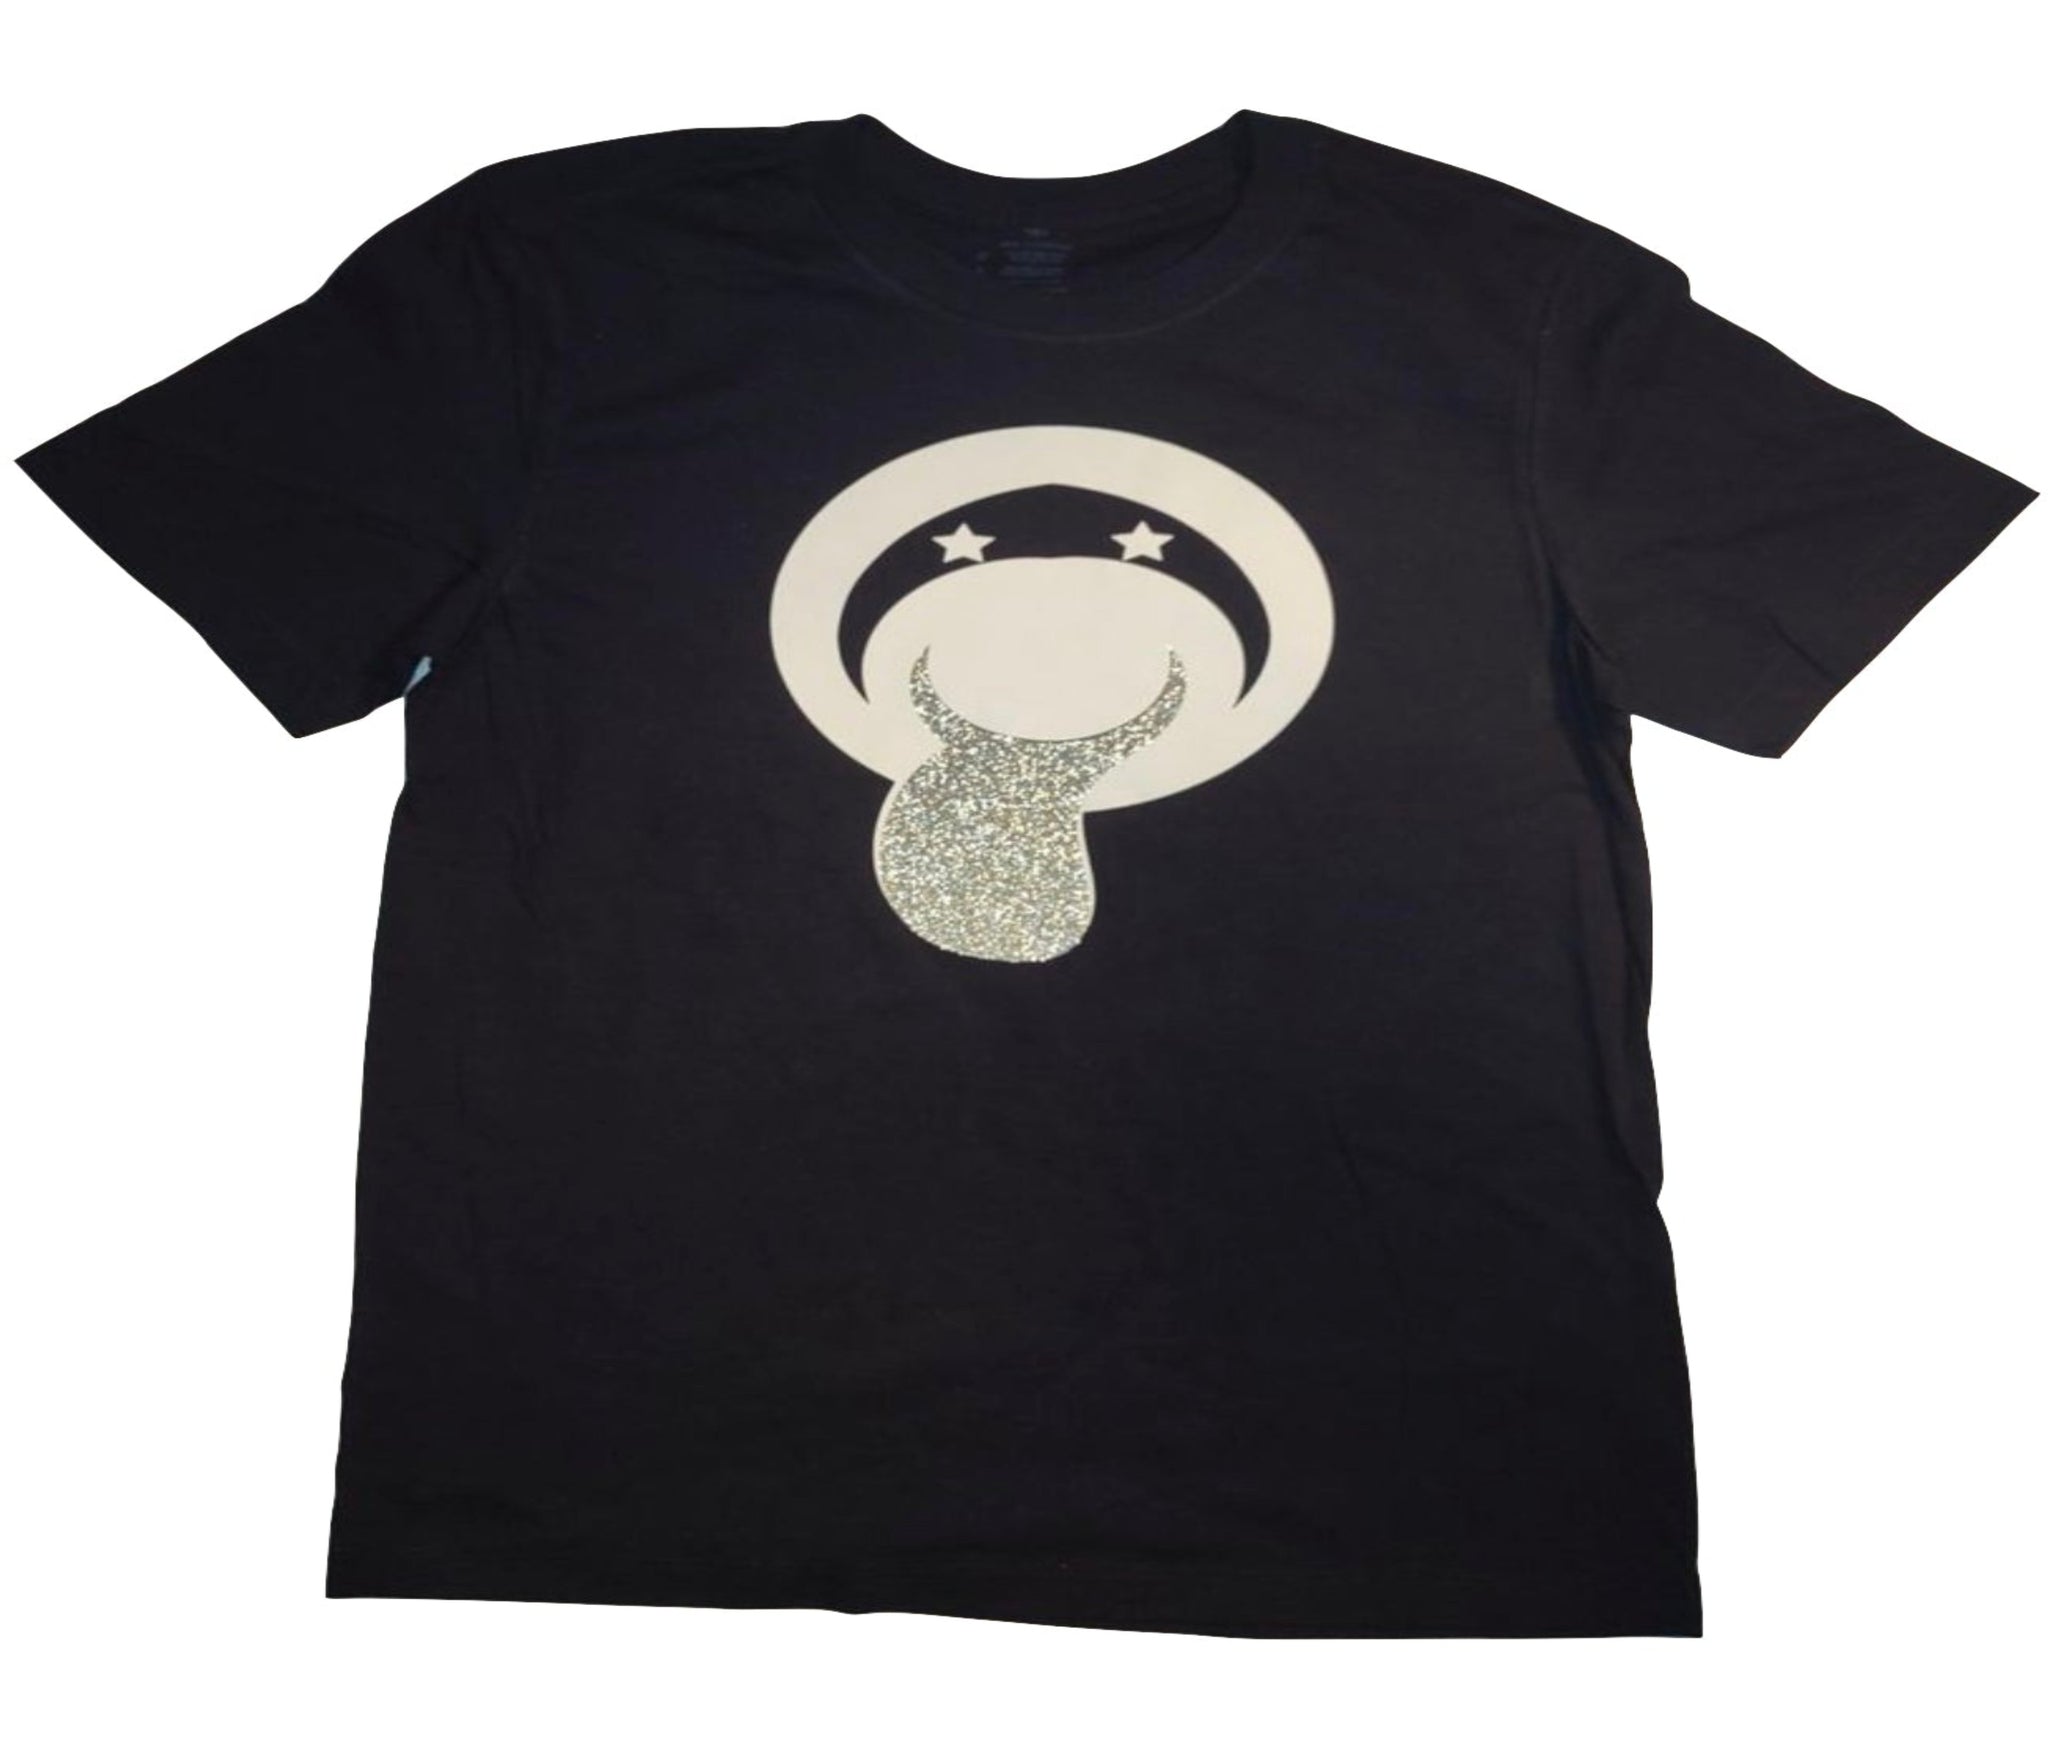 New Bucaleany "Toungeleany Silver" Tshirt